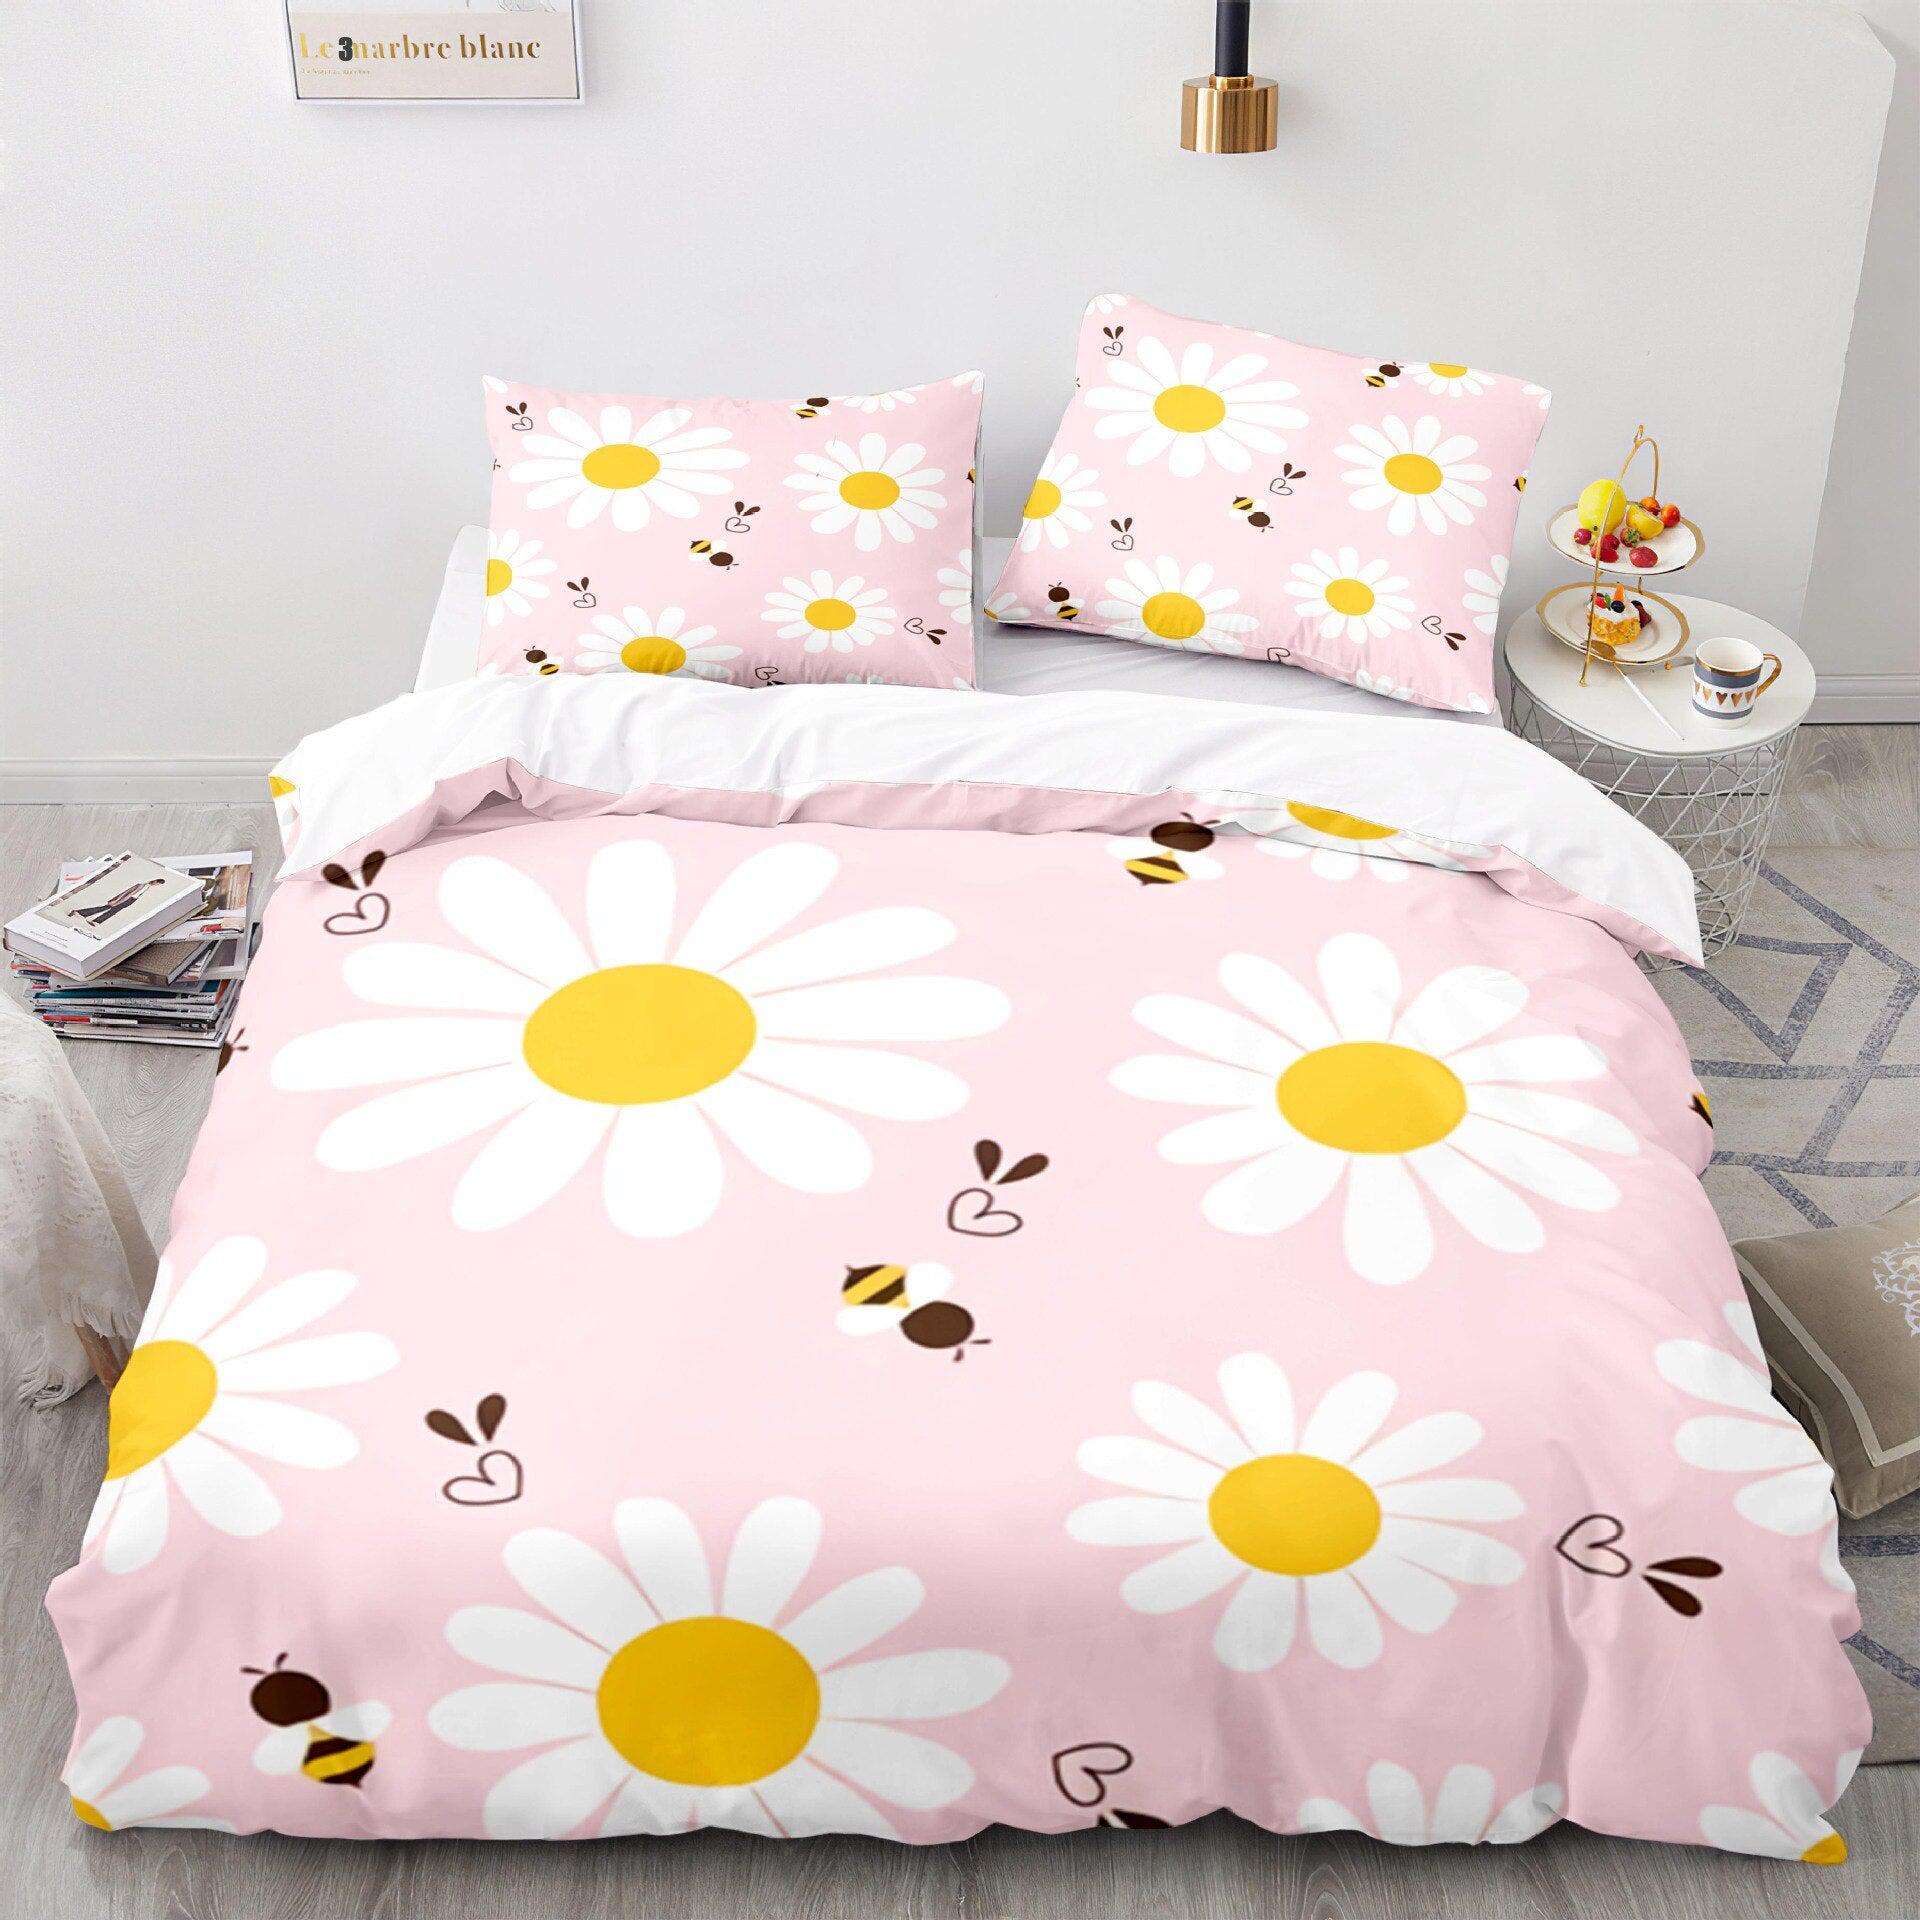 Pink bee duvet cover